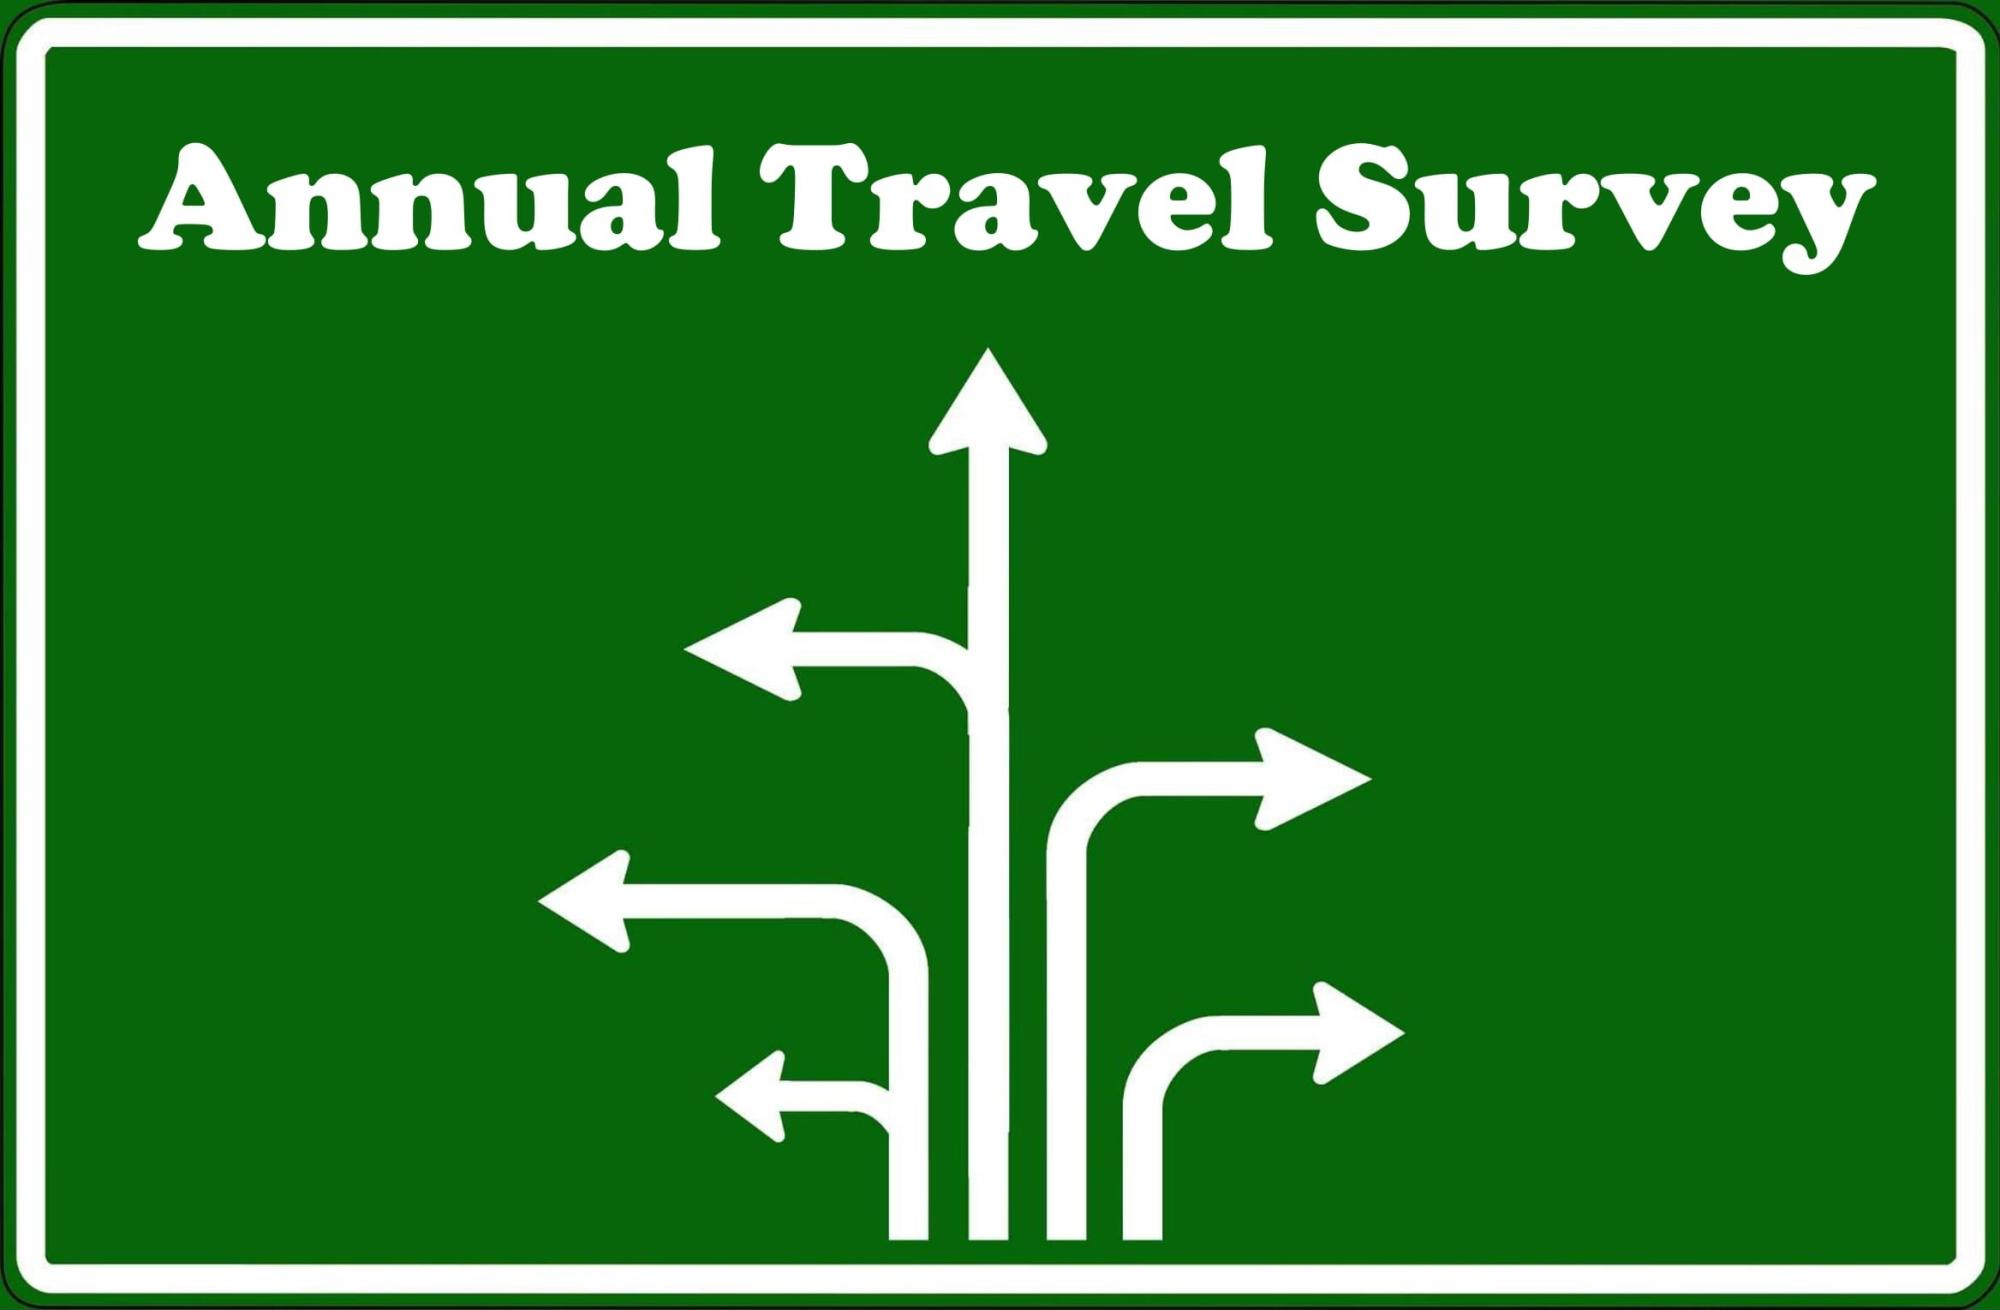 Signpost graphic with text: Annual Travel Survey